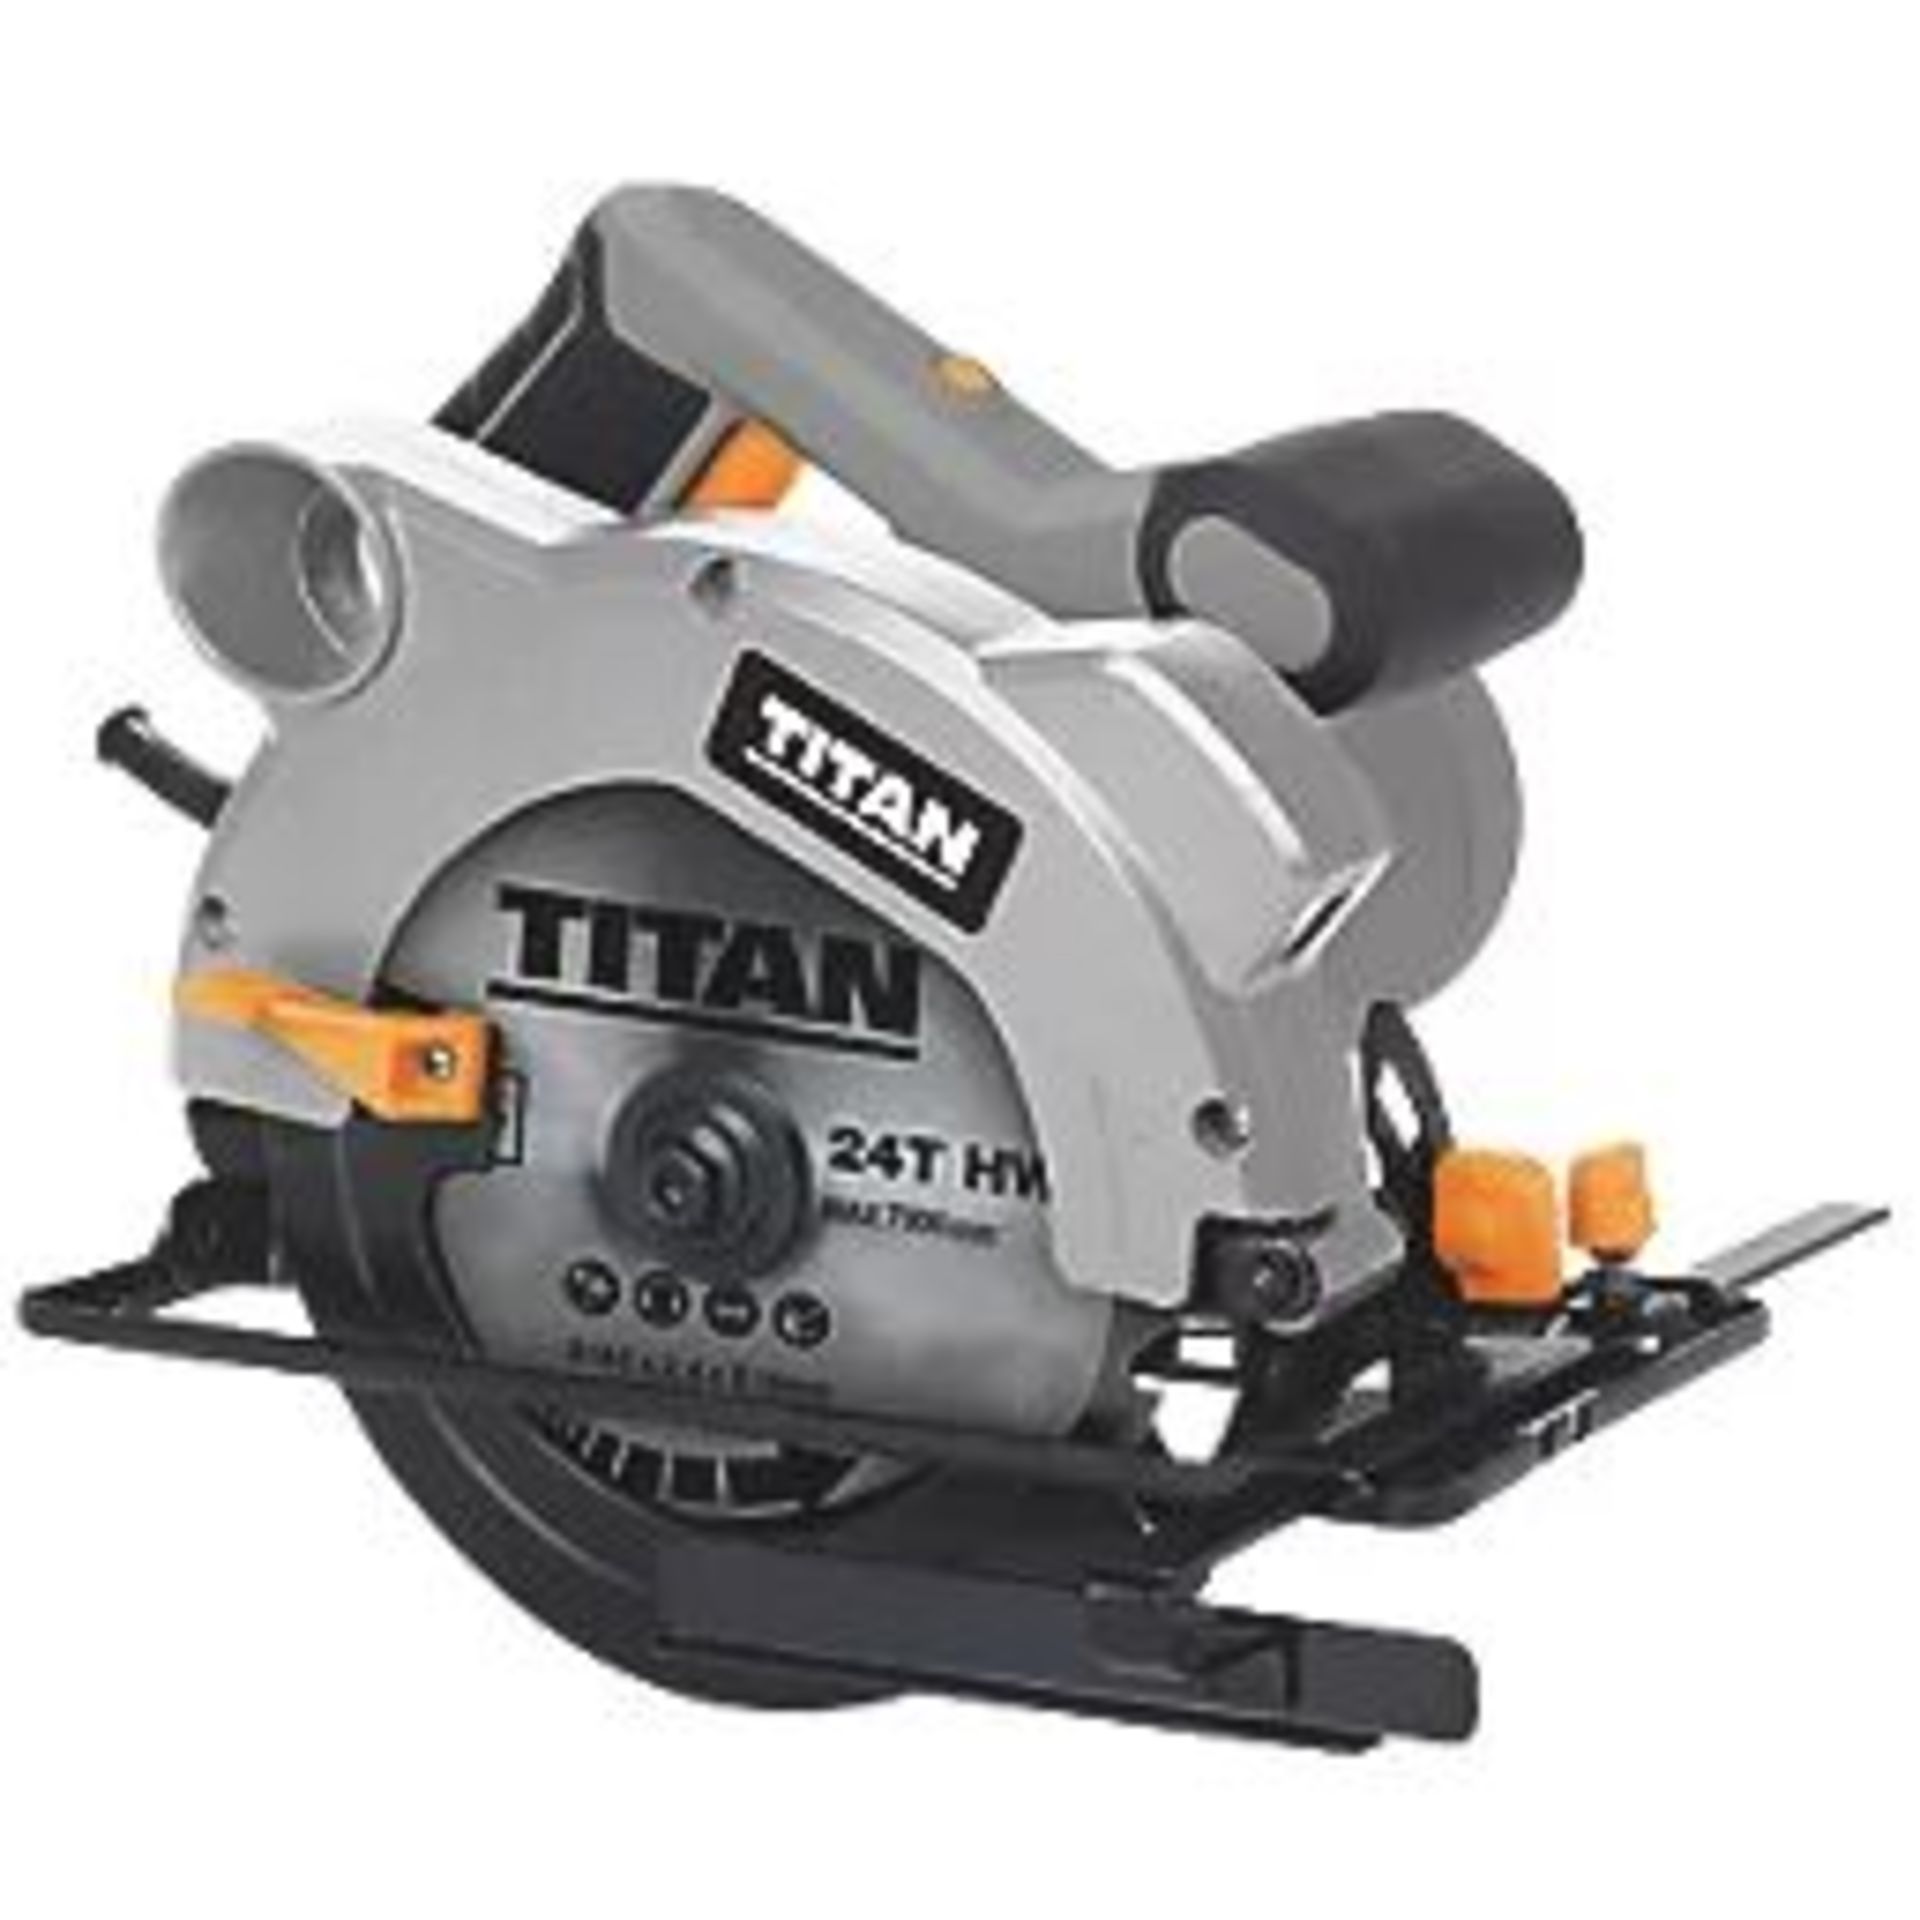 TITAN 1200W 165MM ELECTRIC CIRCULAR SAW 240V. -ER42. Robust 165mm circular saw for precise and